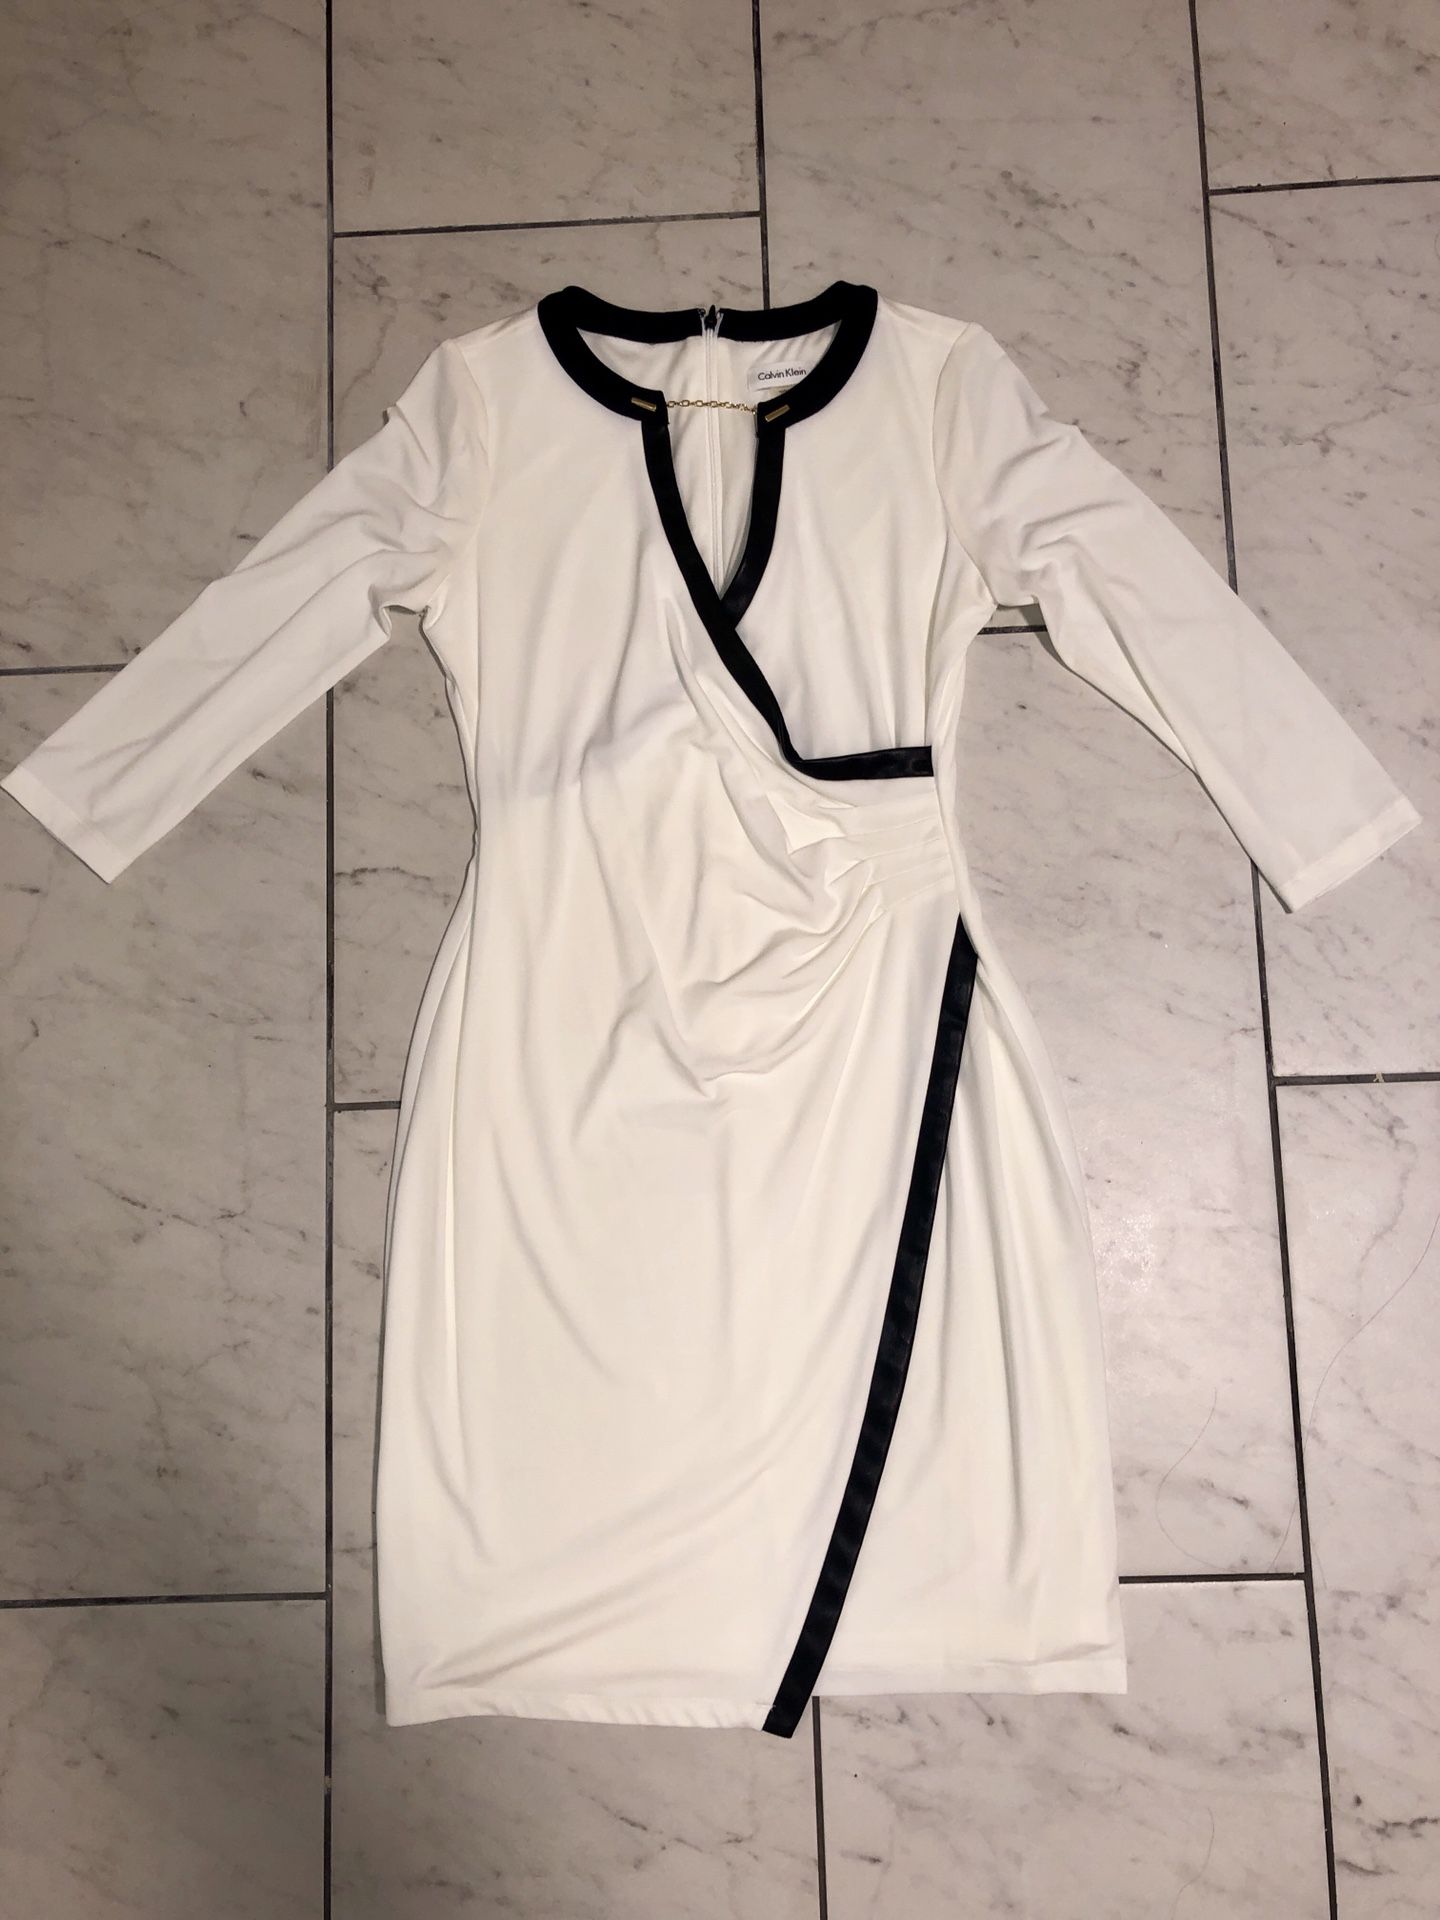 !MUST GO GIVE ME YOUR BEST OFFER! White dress (CALVIN KLIEN) size 6 BRAND NEW